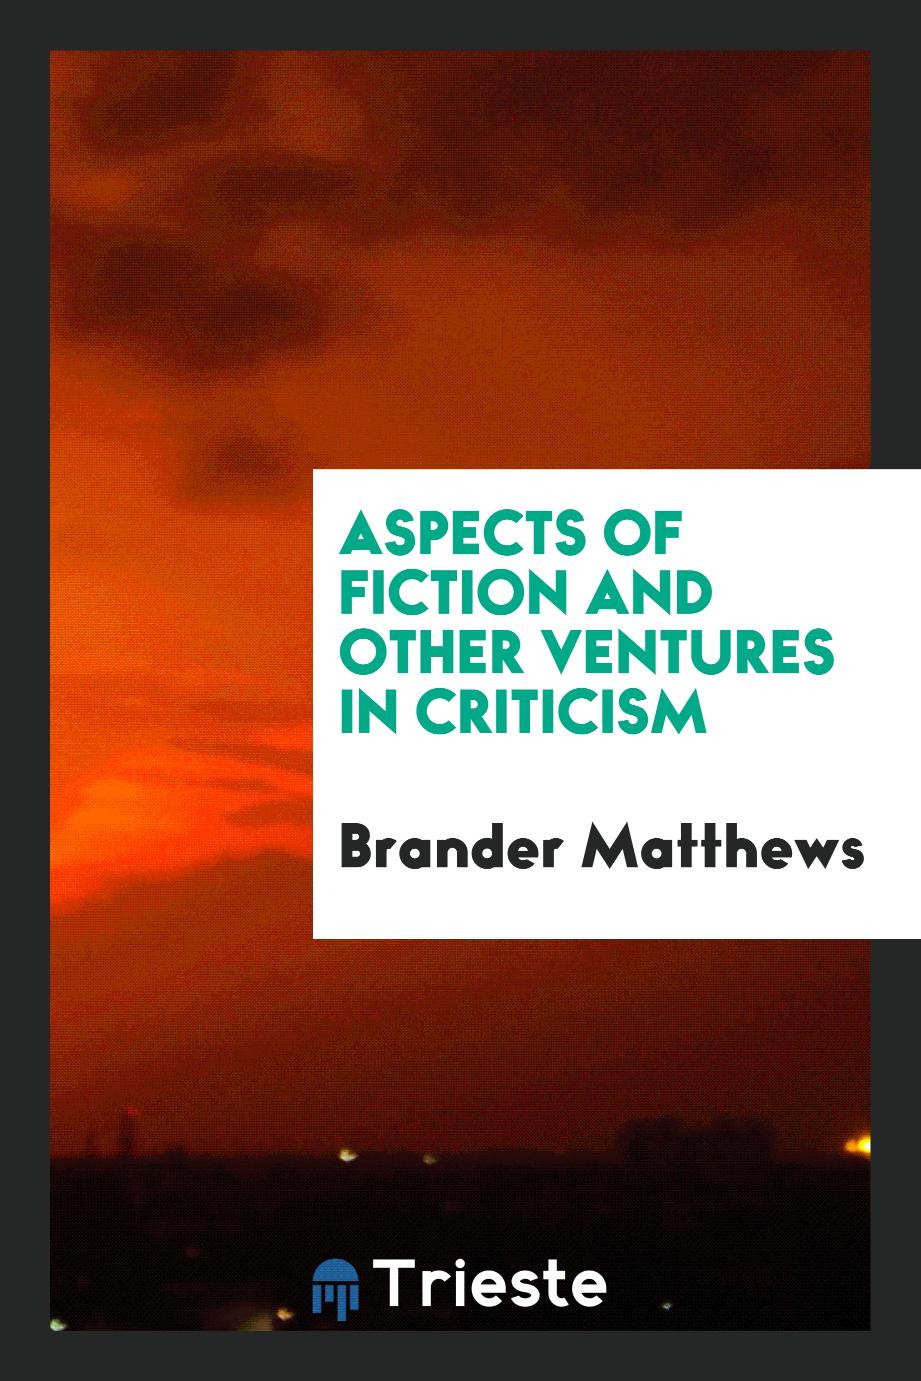 Brander Matthews - Aspects of fiction and other ventures in criticism